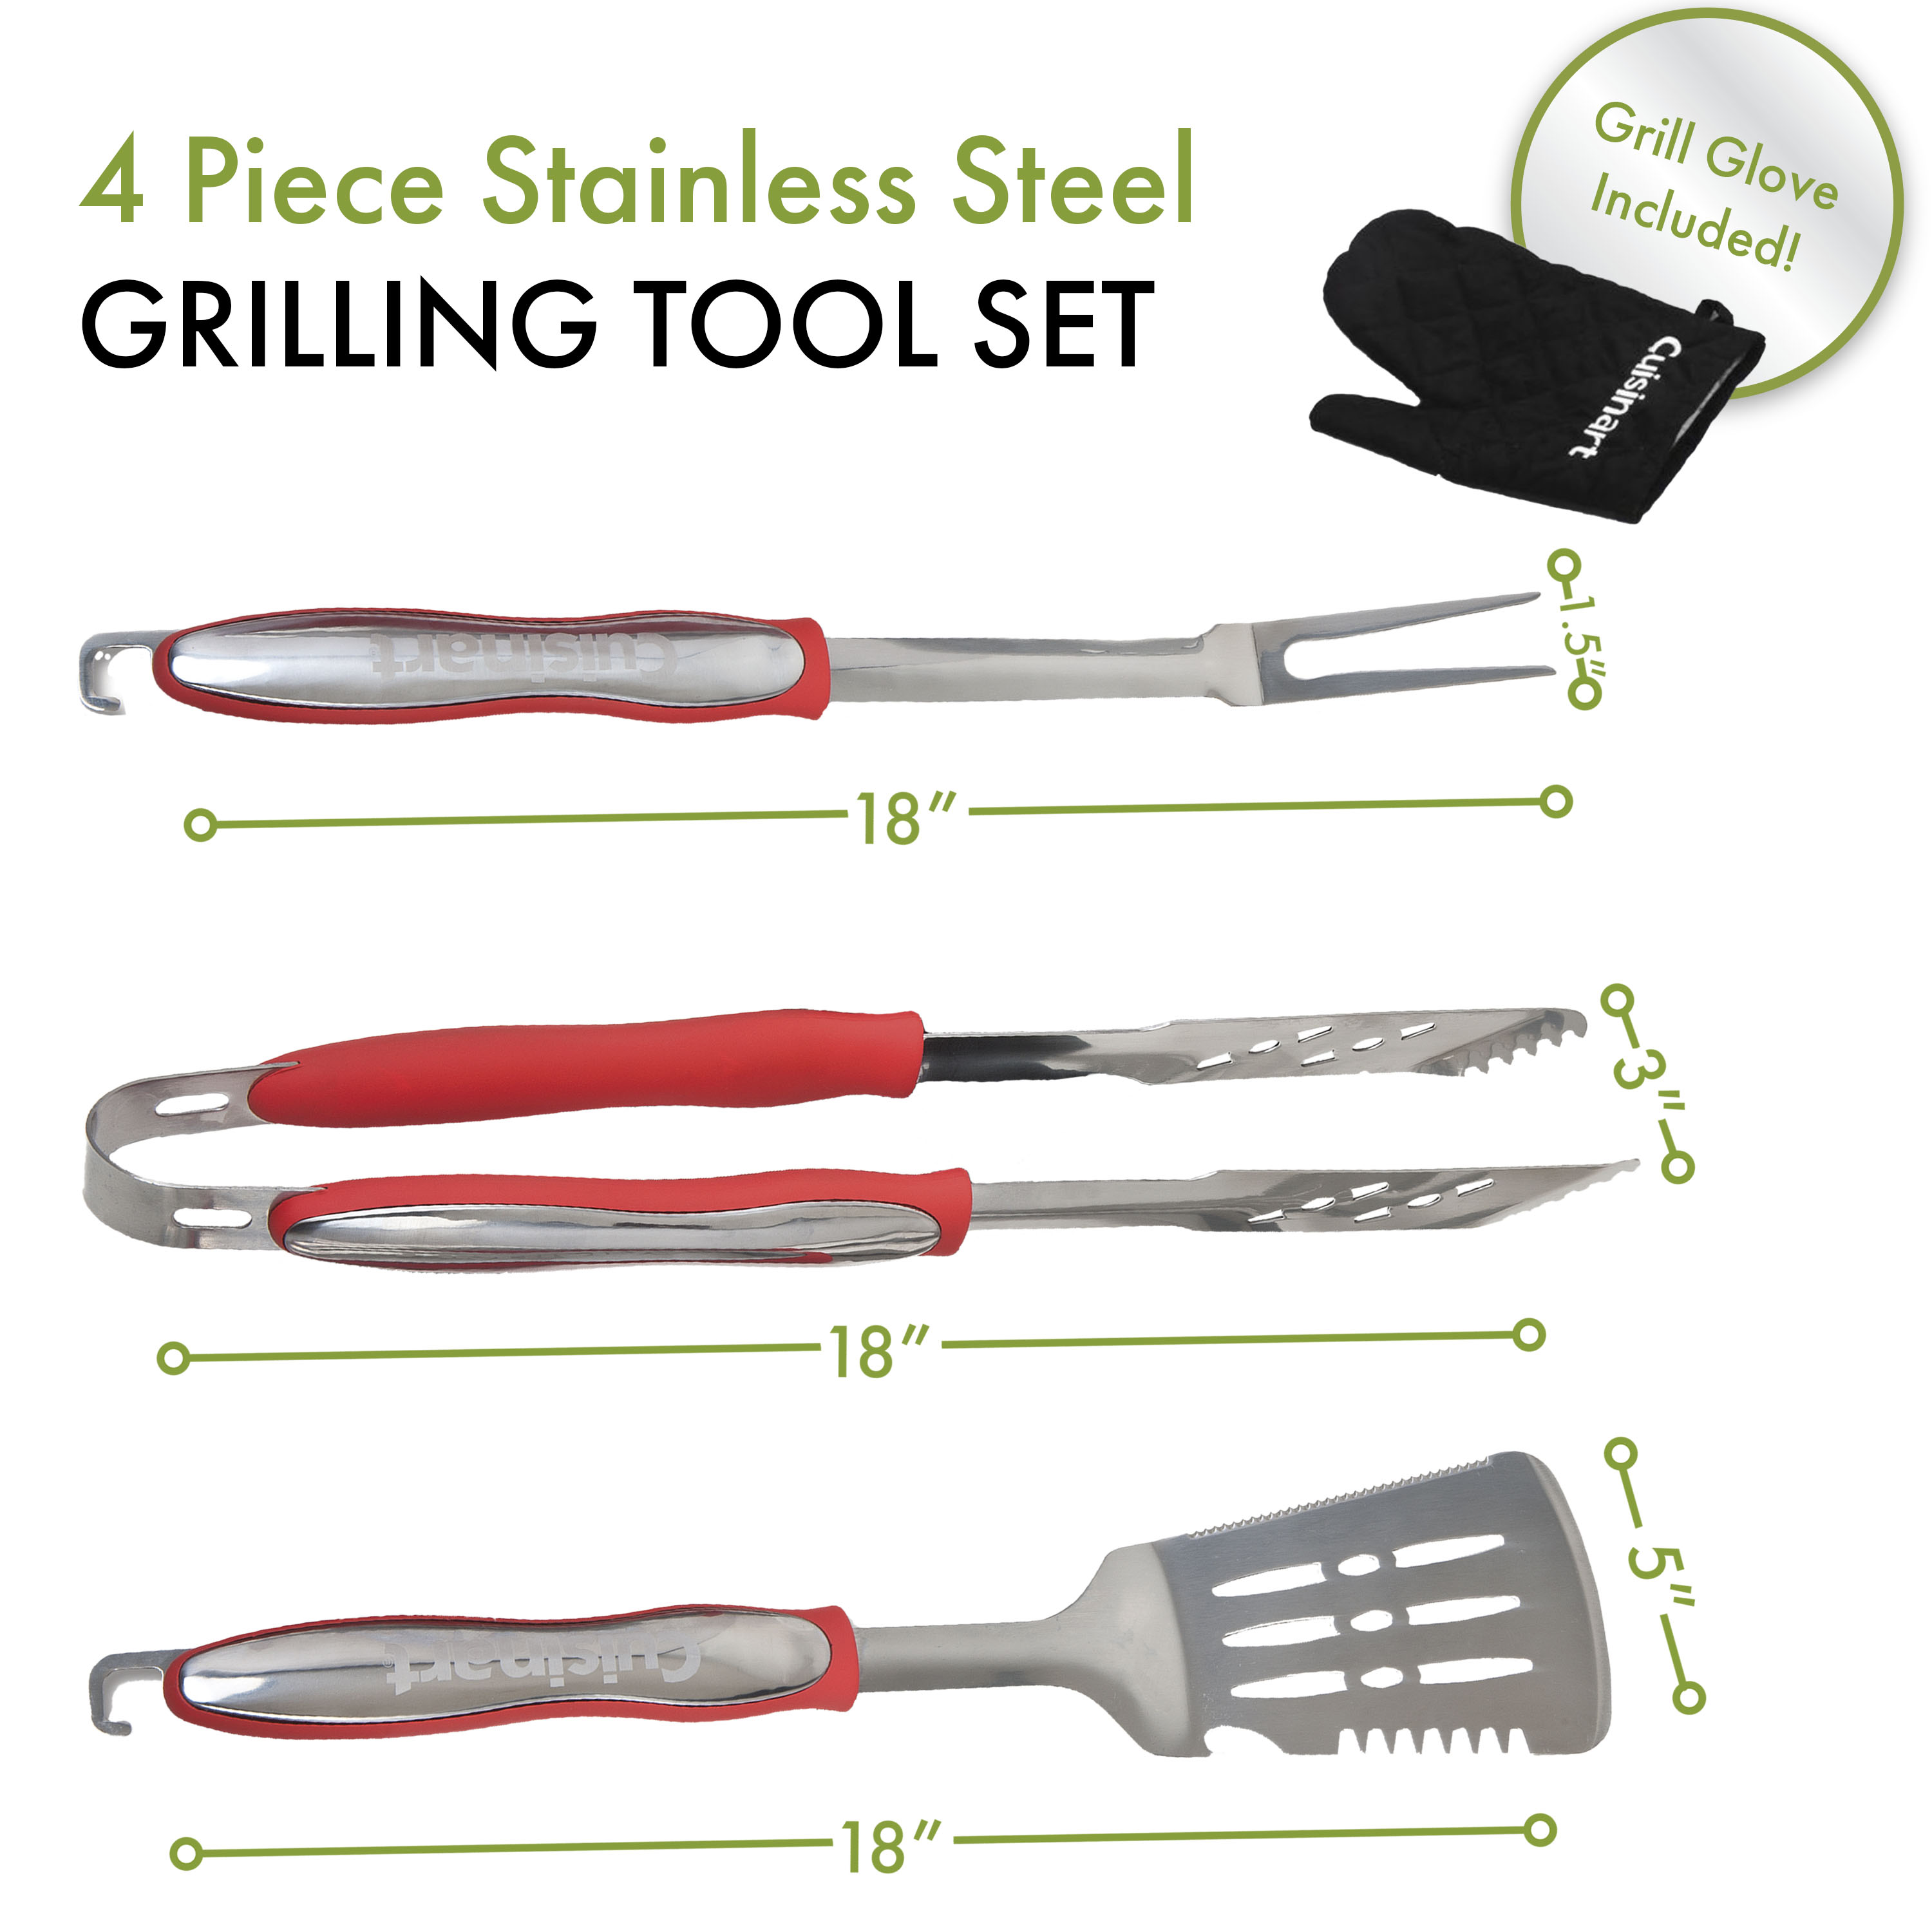 Cuisinart 4-Piece Grill Tool Set With Grill Glove - CGS-134 - image 2 of 3